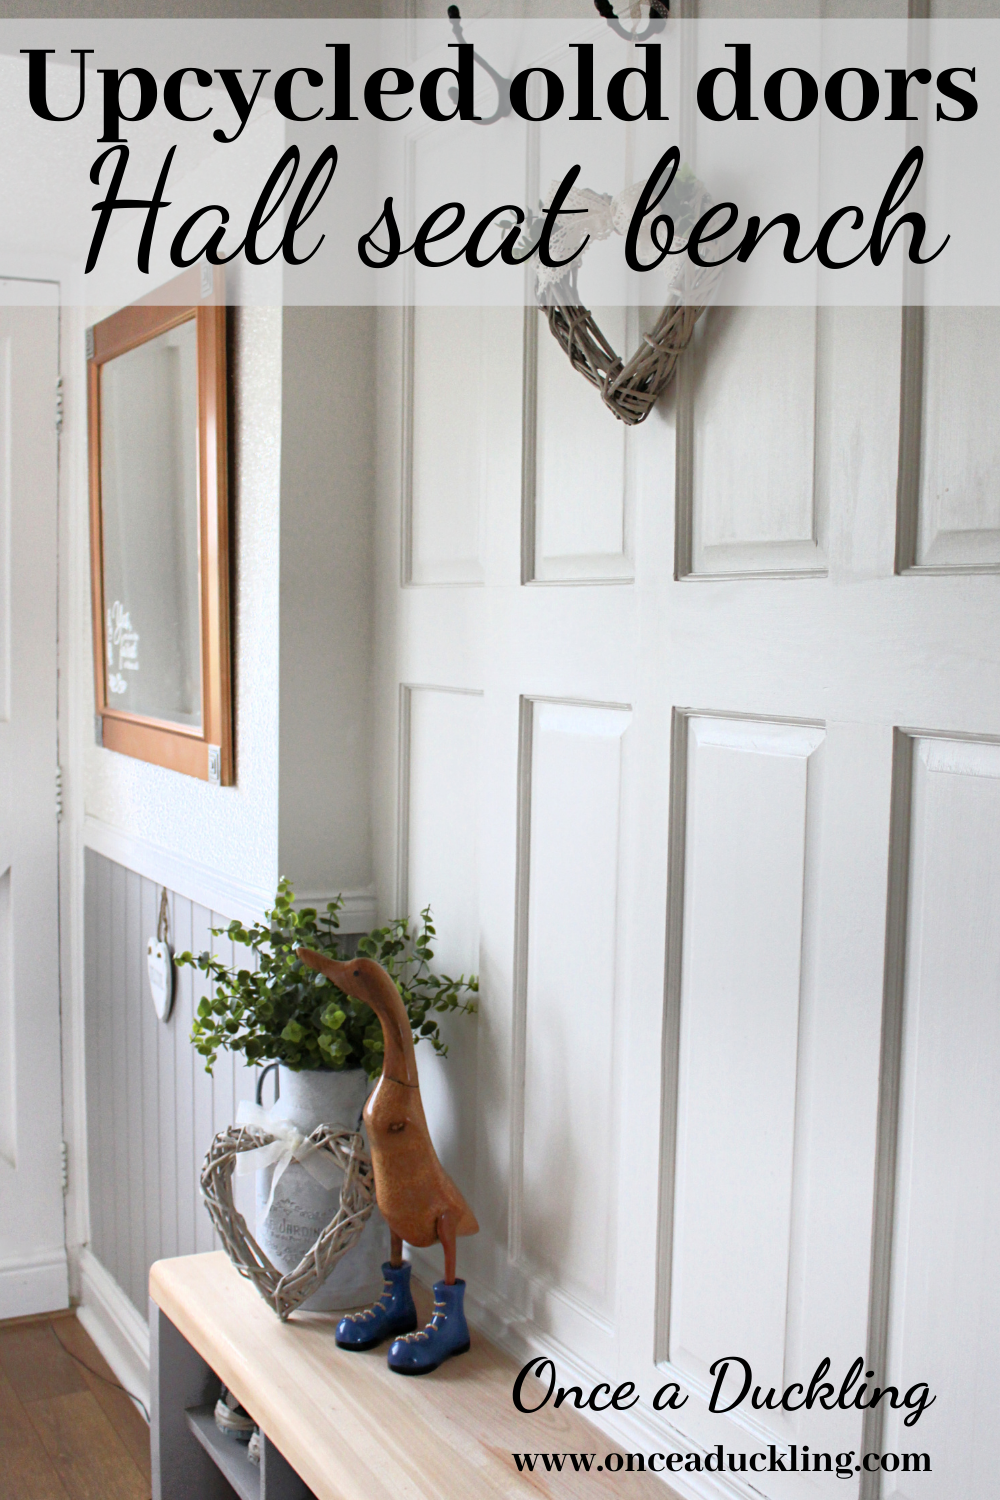 Up-cycled old doors hall seat